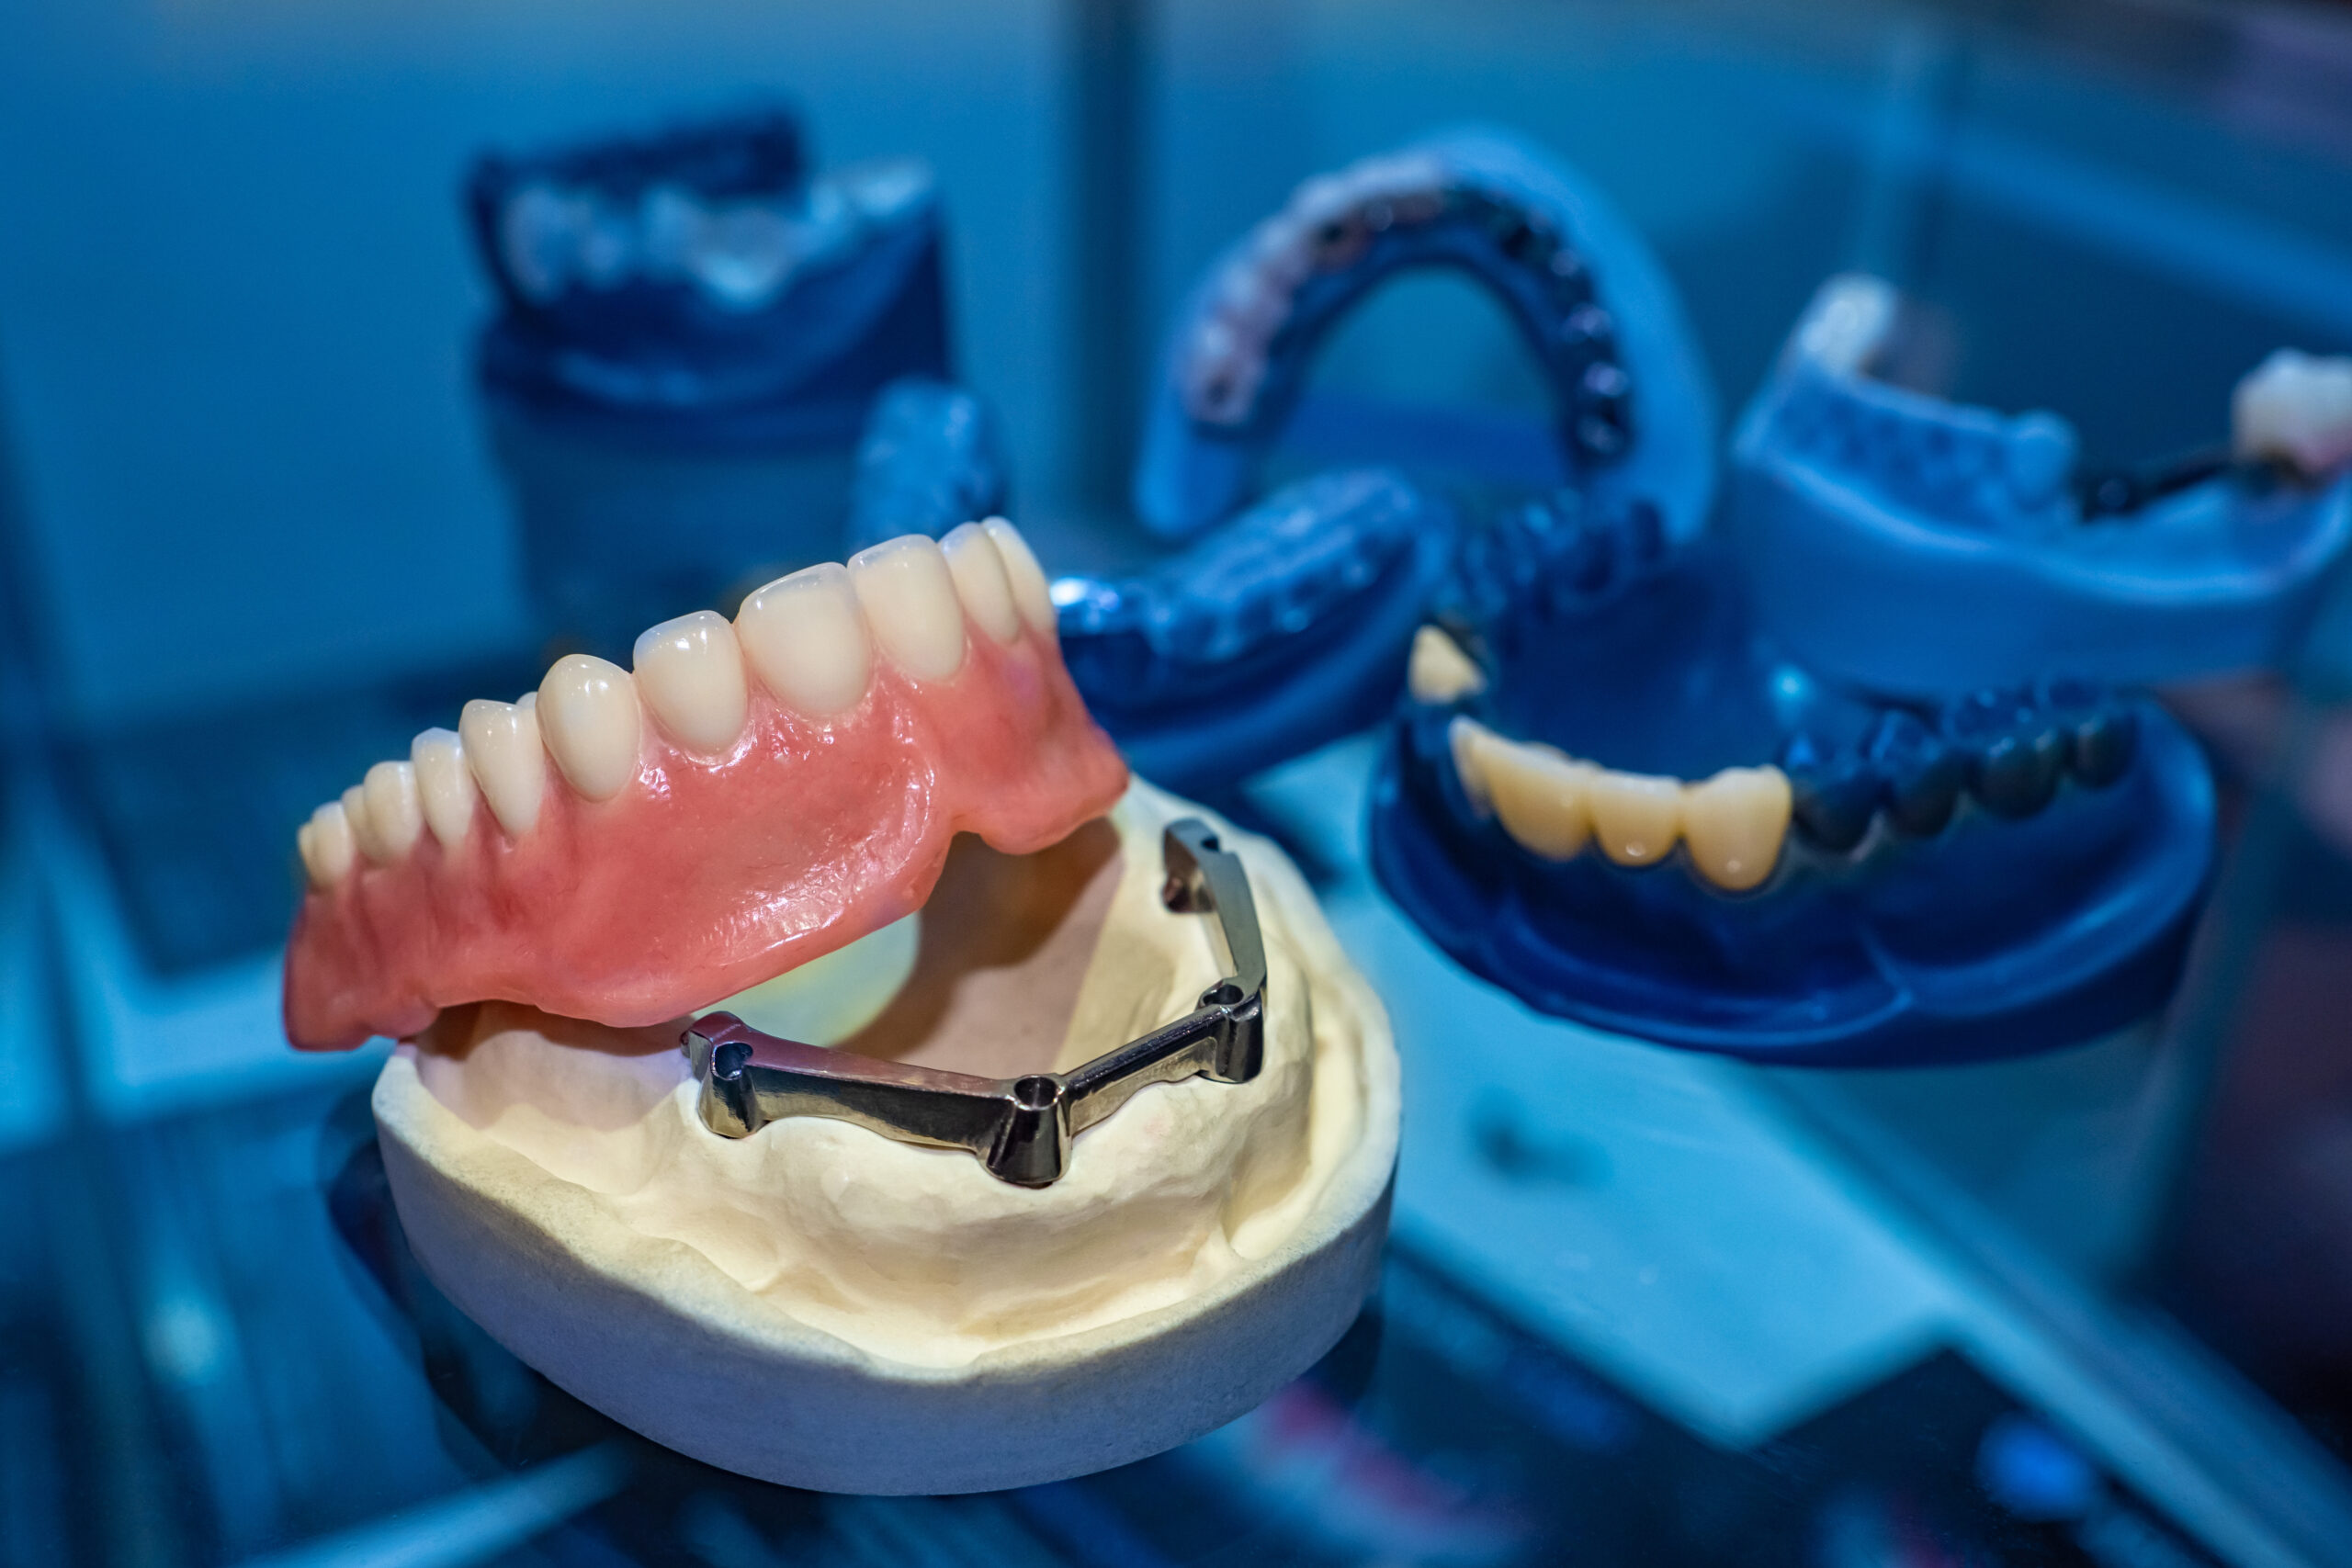 image of a dental implant denture on a prosthesis jaw in a dark and blue lit aesthetic dental room image of a dental implant denture on a prosthesis jaw in a dark and blue lit aesthetic dental room.